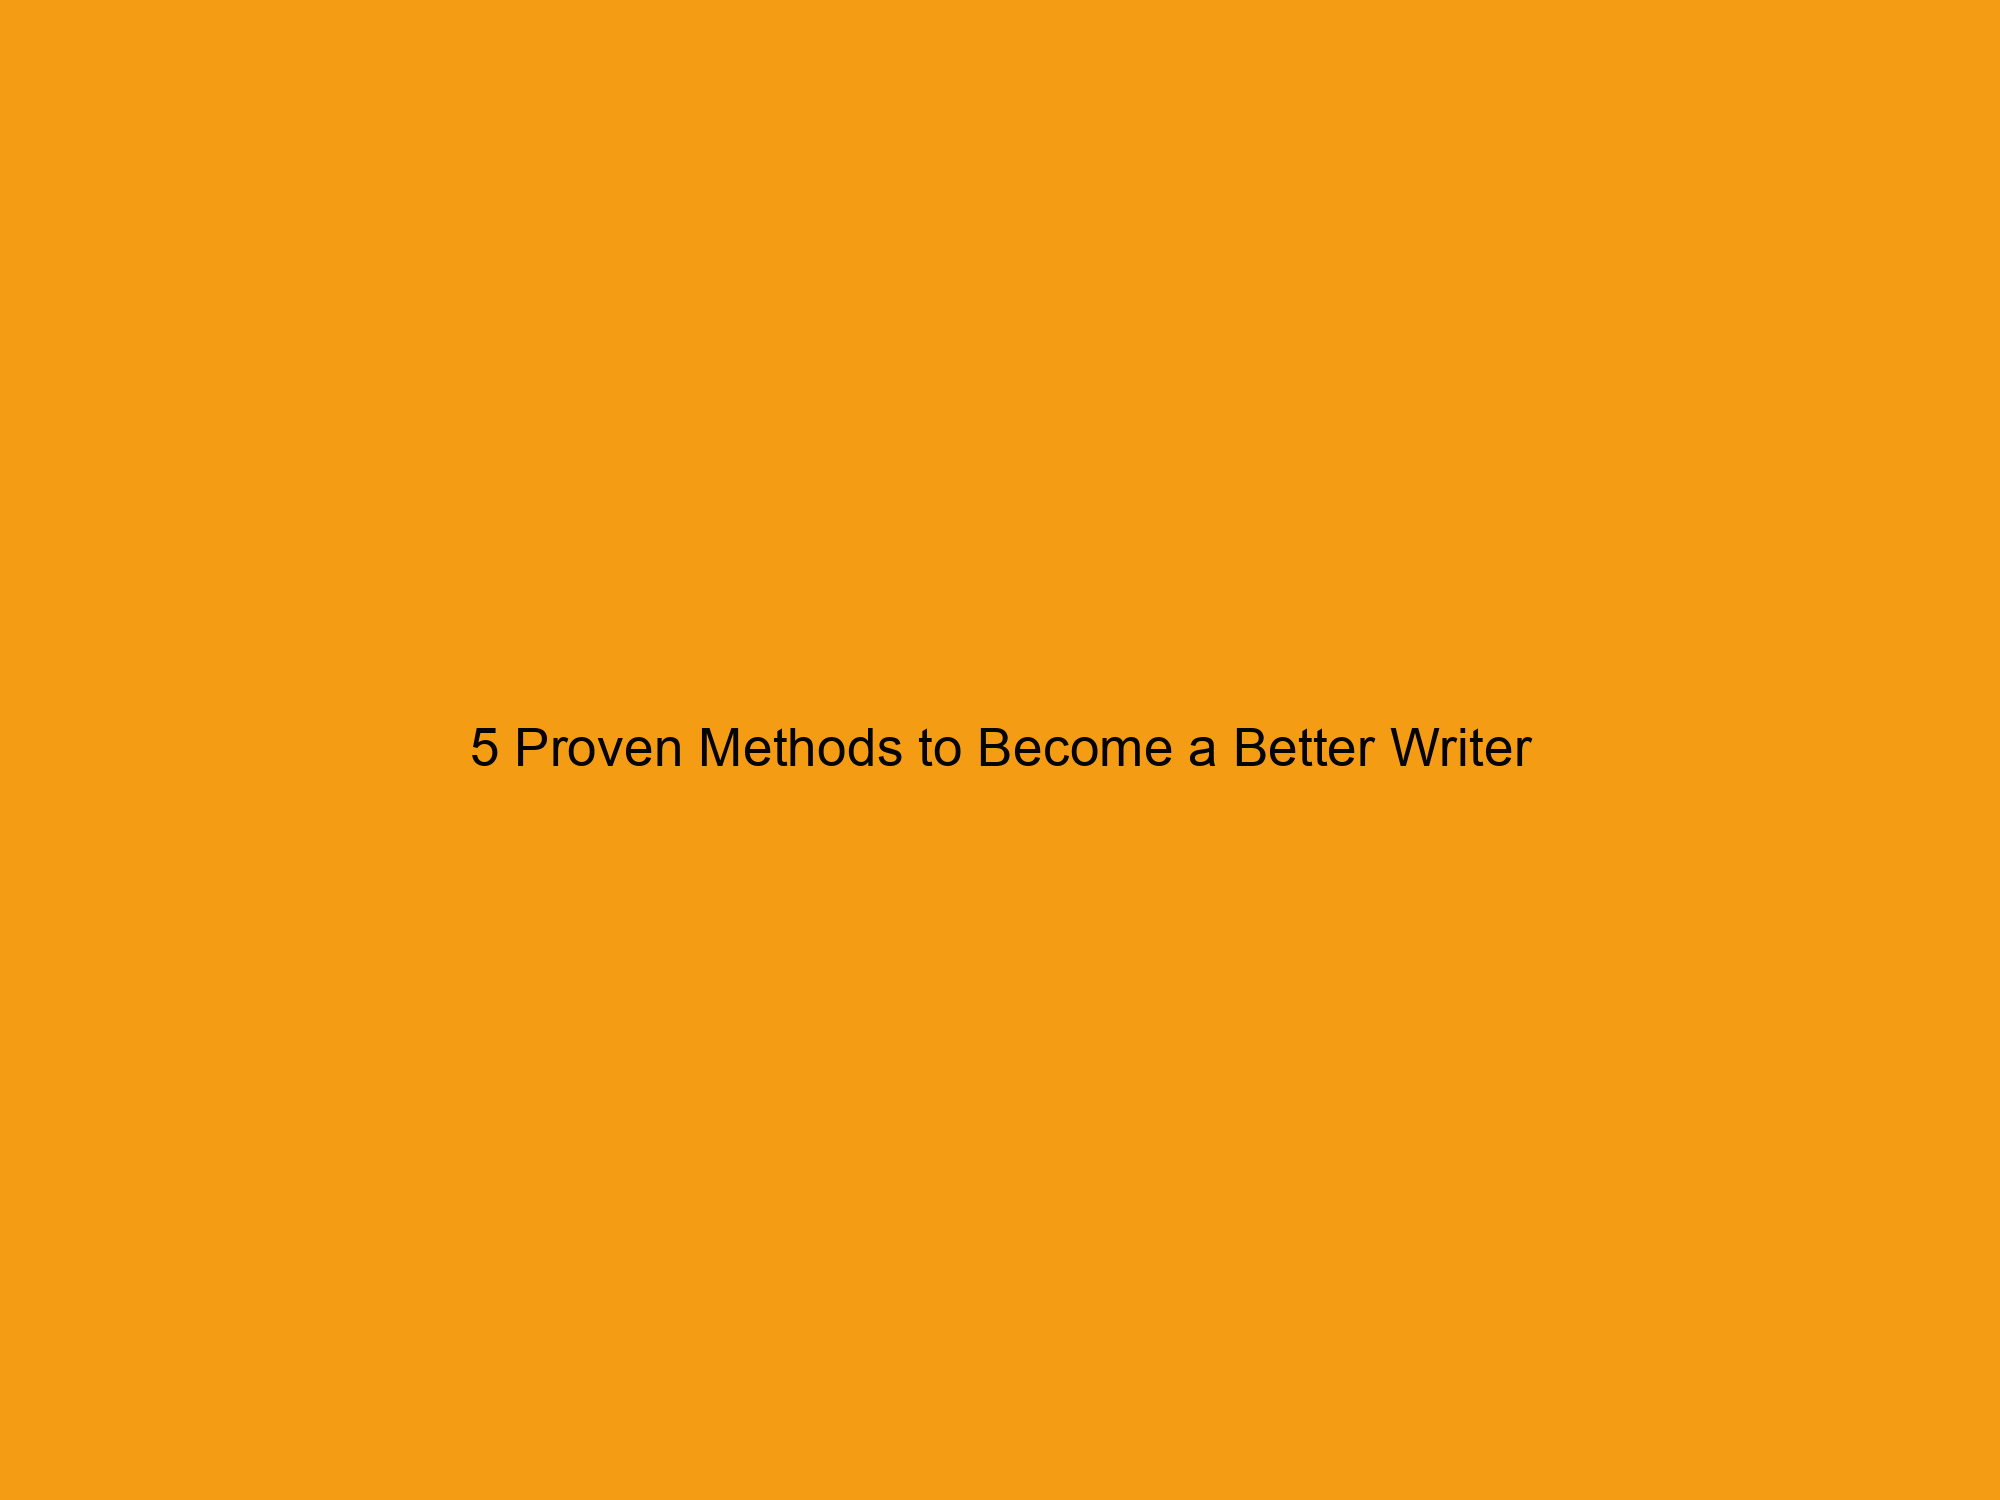 5 Proven Methods to Become a Better Writer